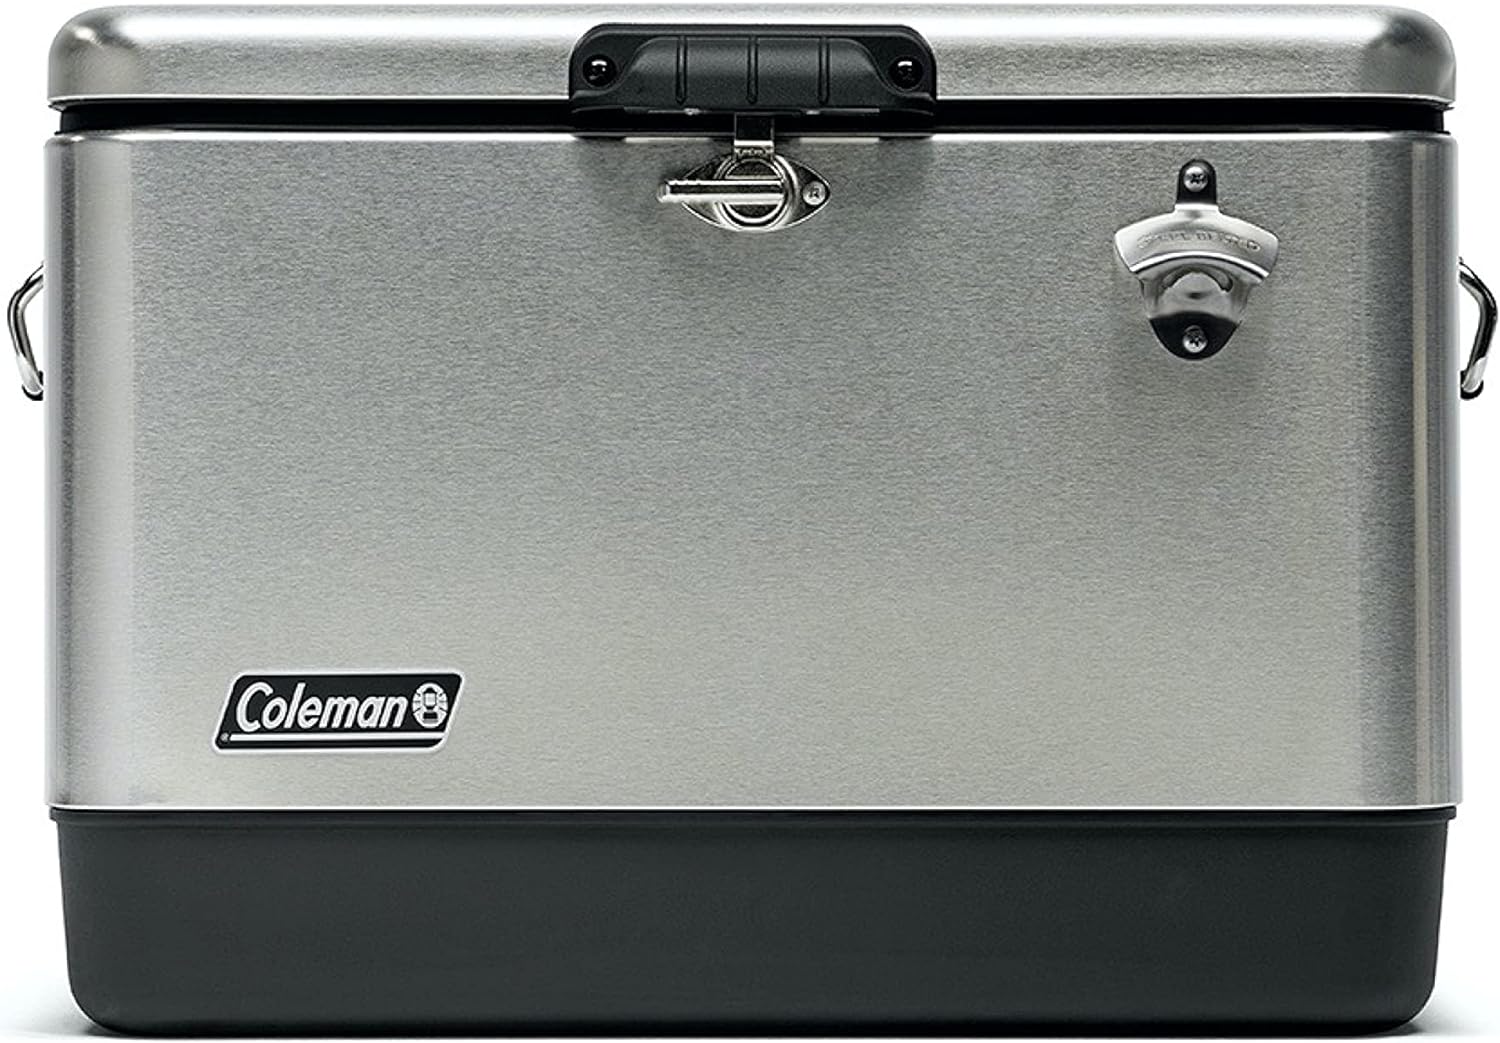 Can You Put Dry Ice in a Coleman Cooler?